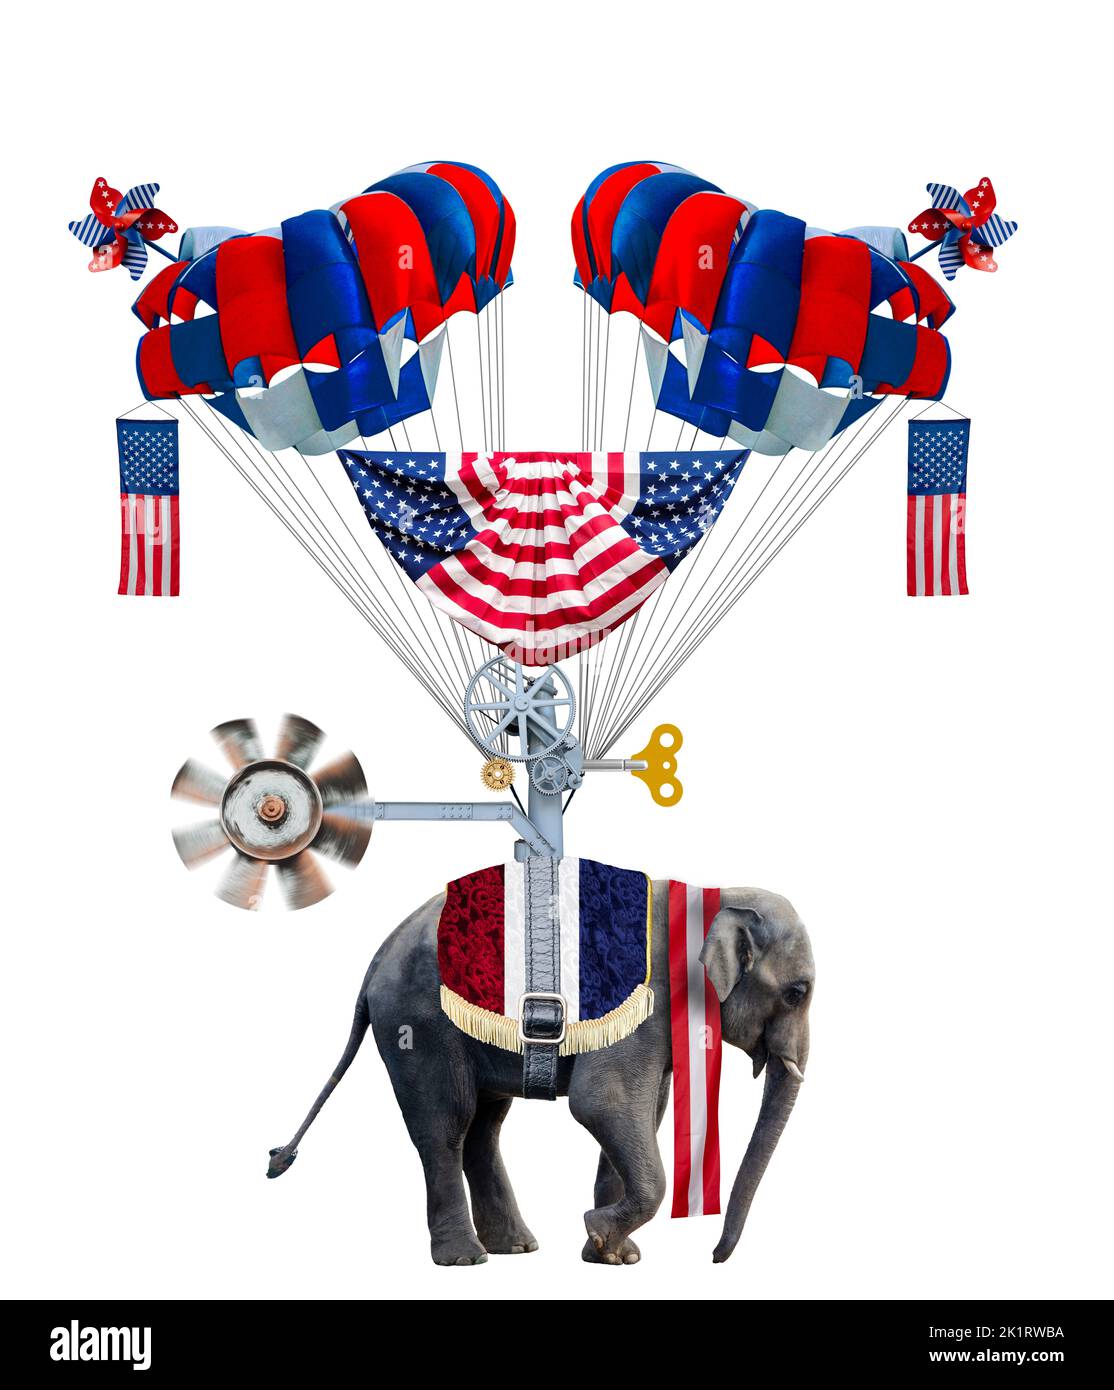 Republican Party, Flight of the Elephant Stock Photo